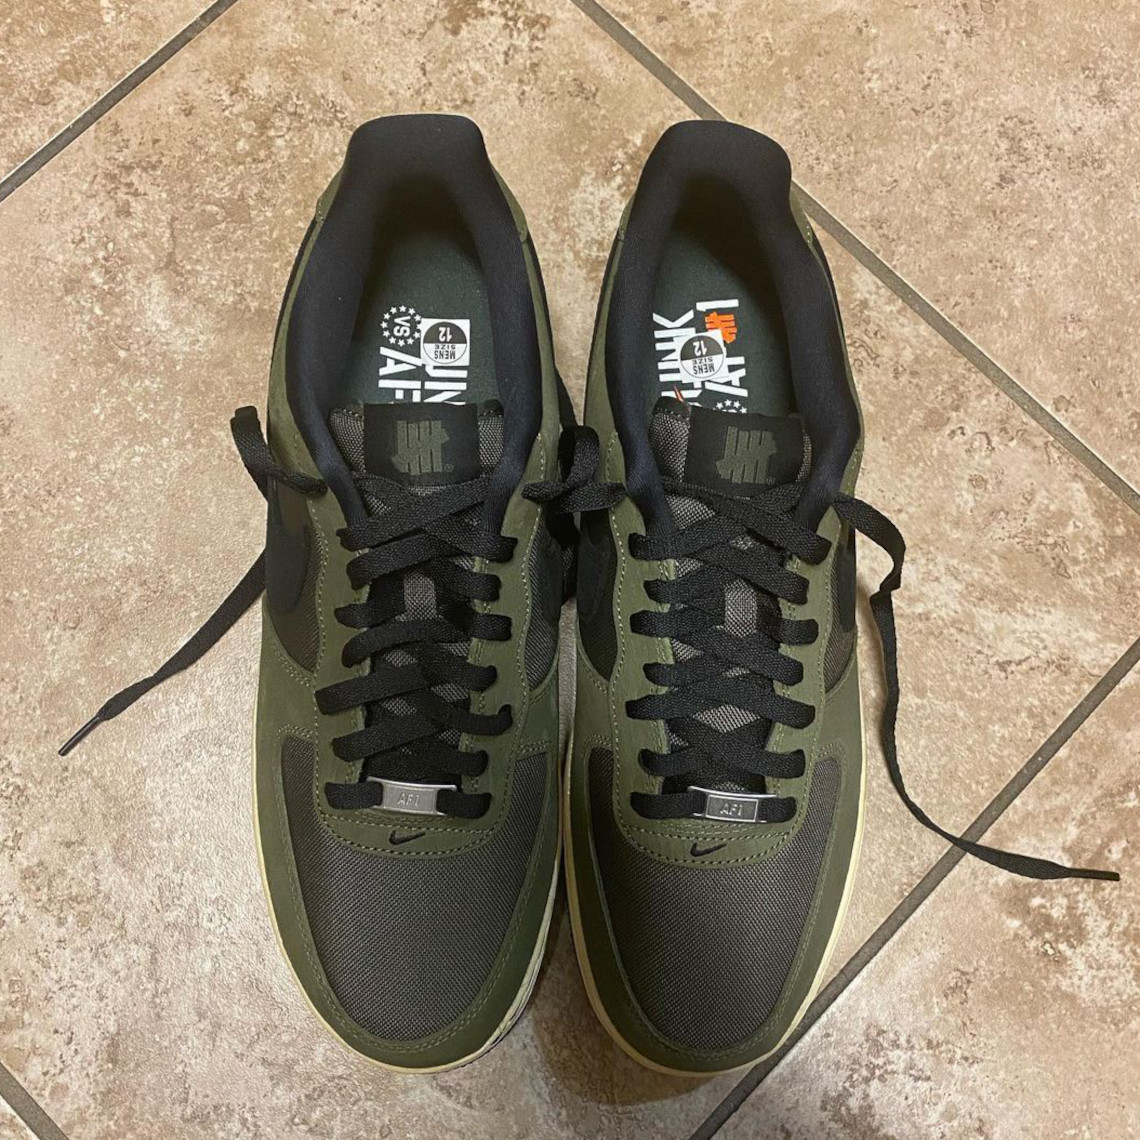 UNDEFEATED x Nike Air Force 1 Low "Ballistic"